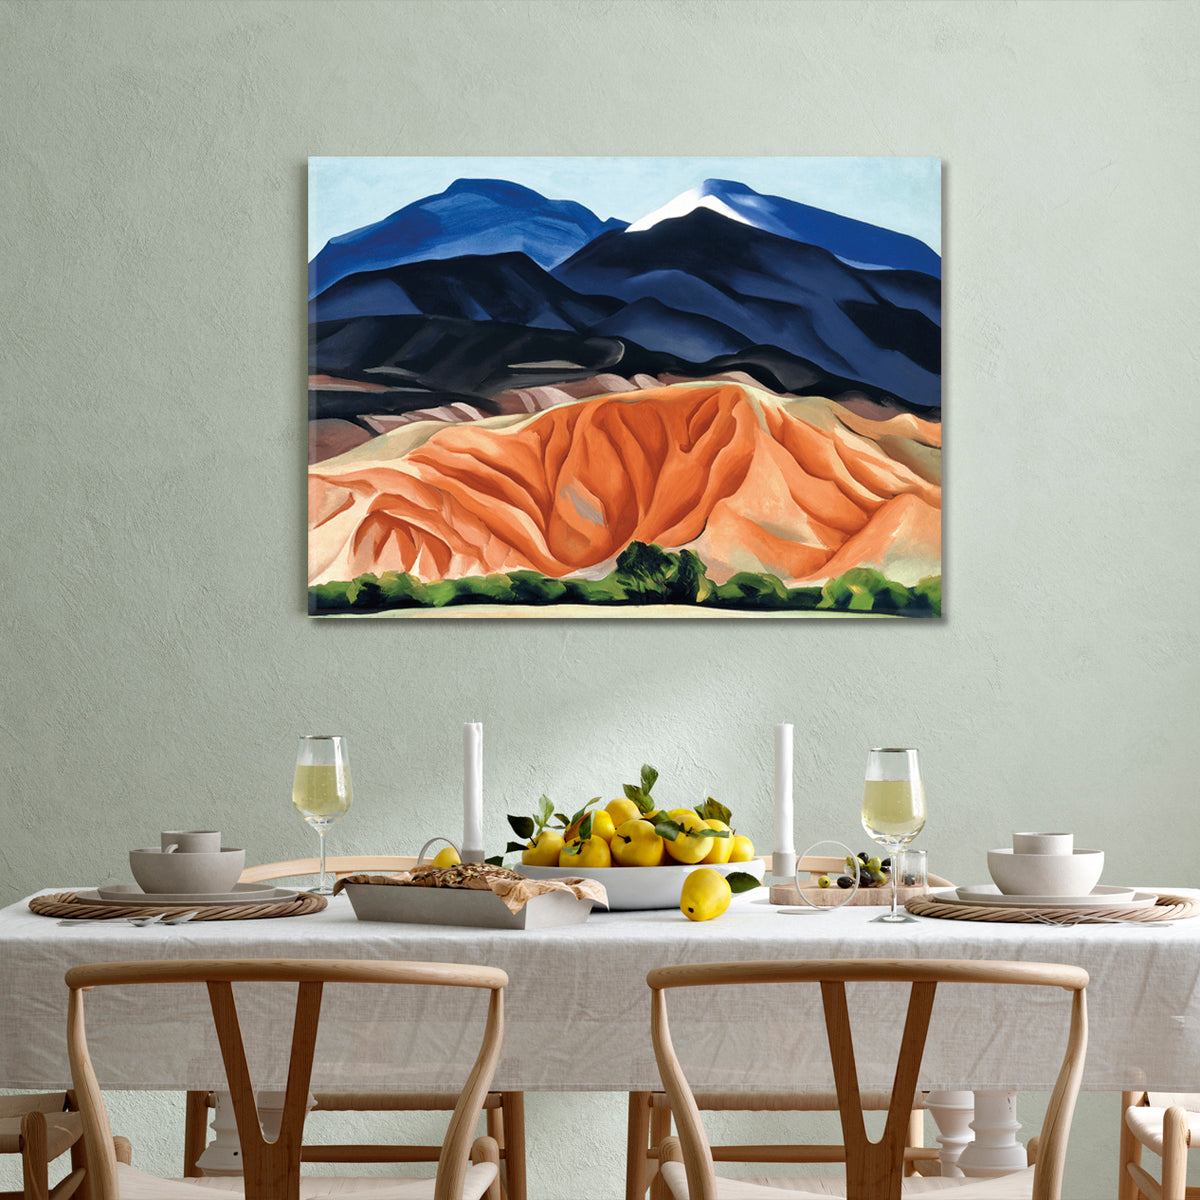 BEAUTY IN DETAILS Desert Landscape Shapes and Forms Abstract Art Print Artesty 1 panel 24" x 16" 